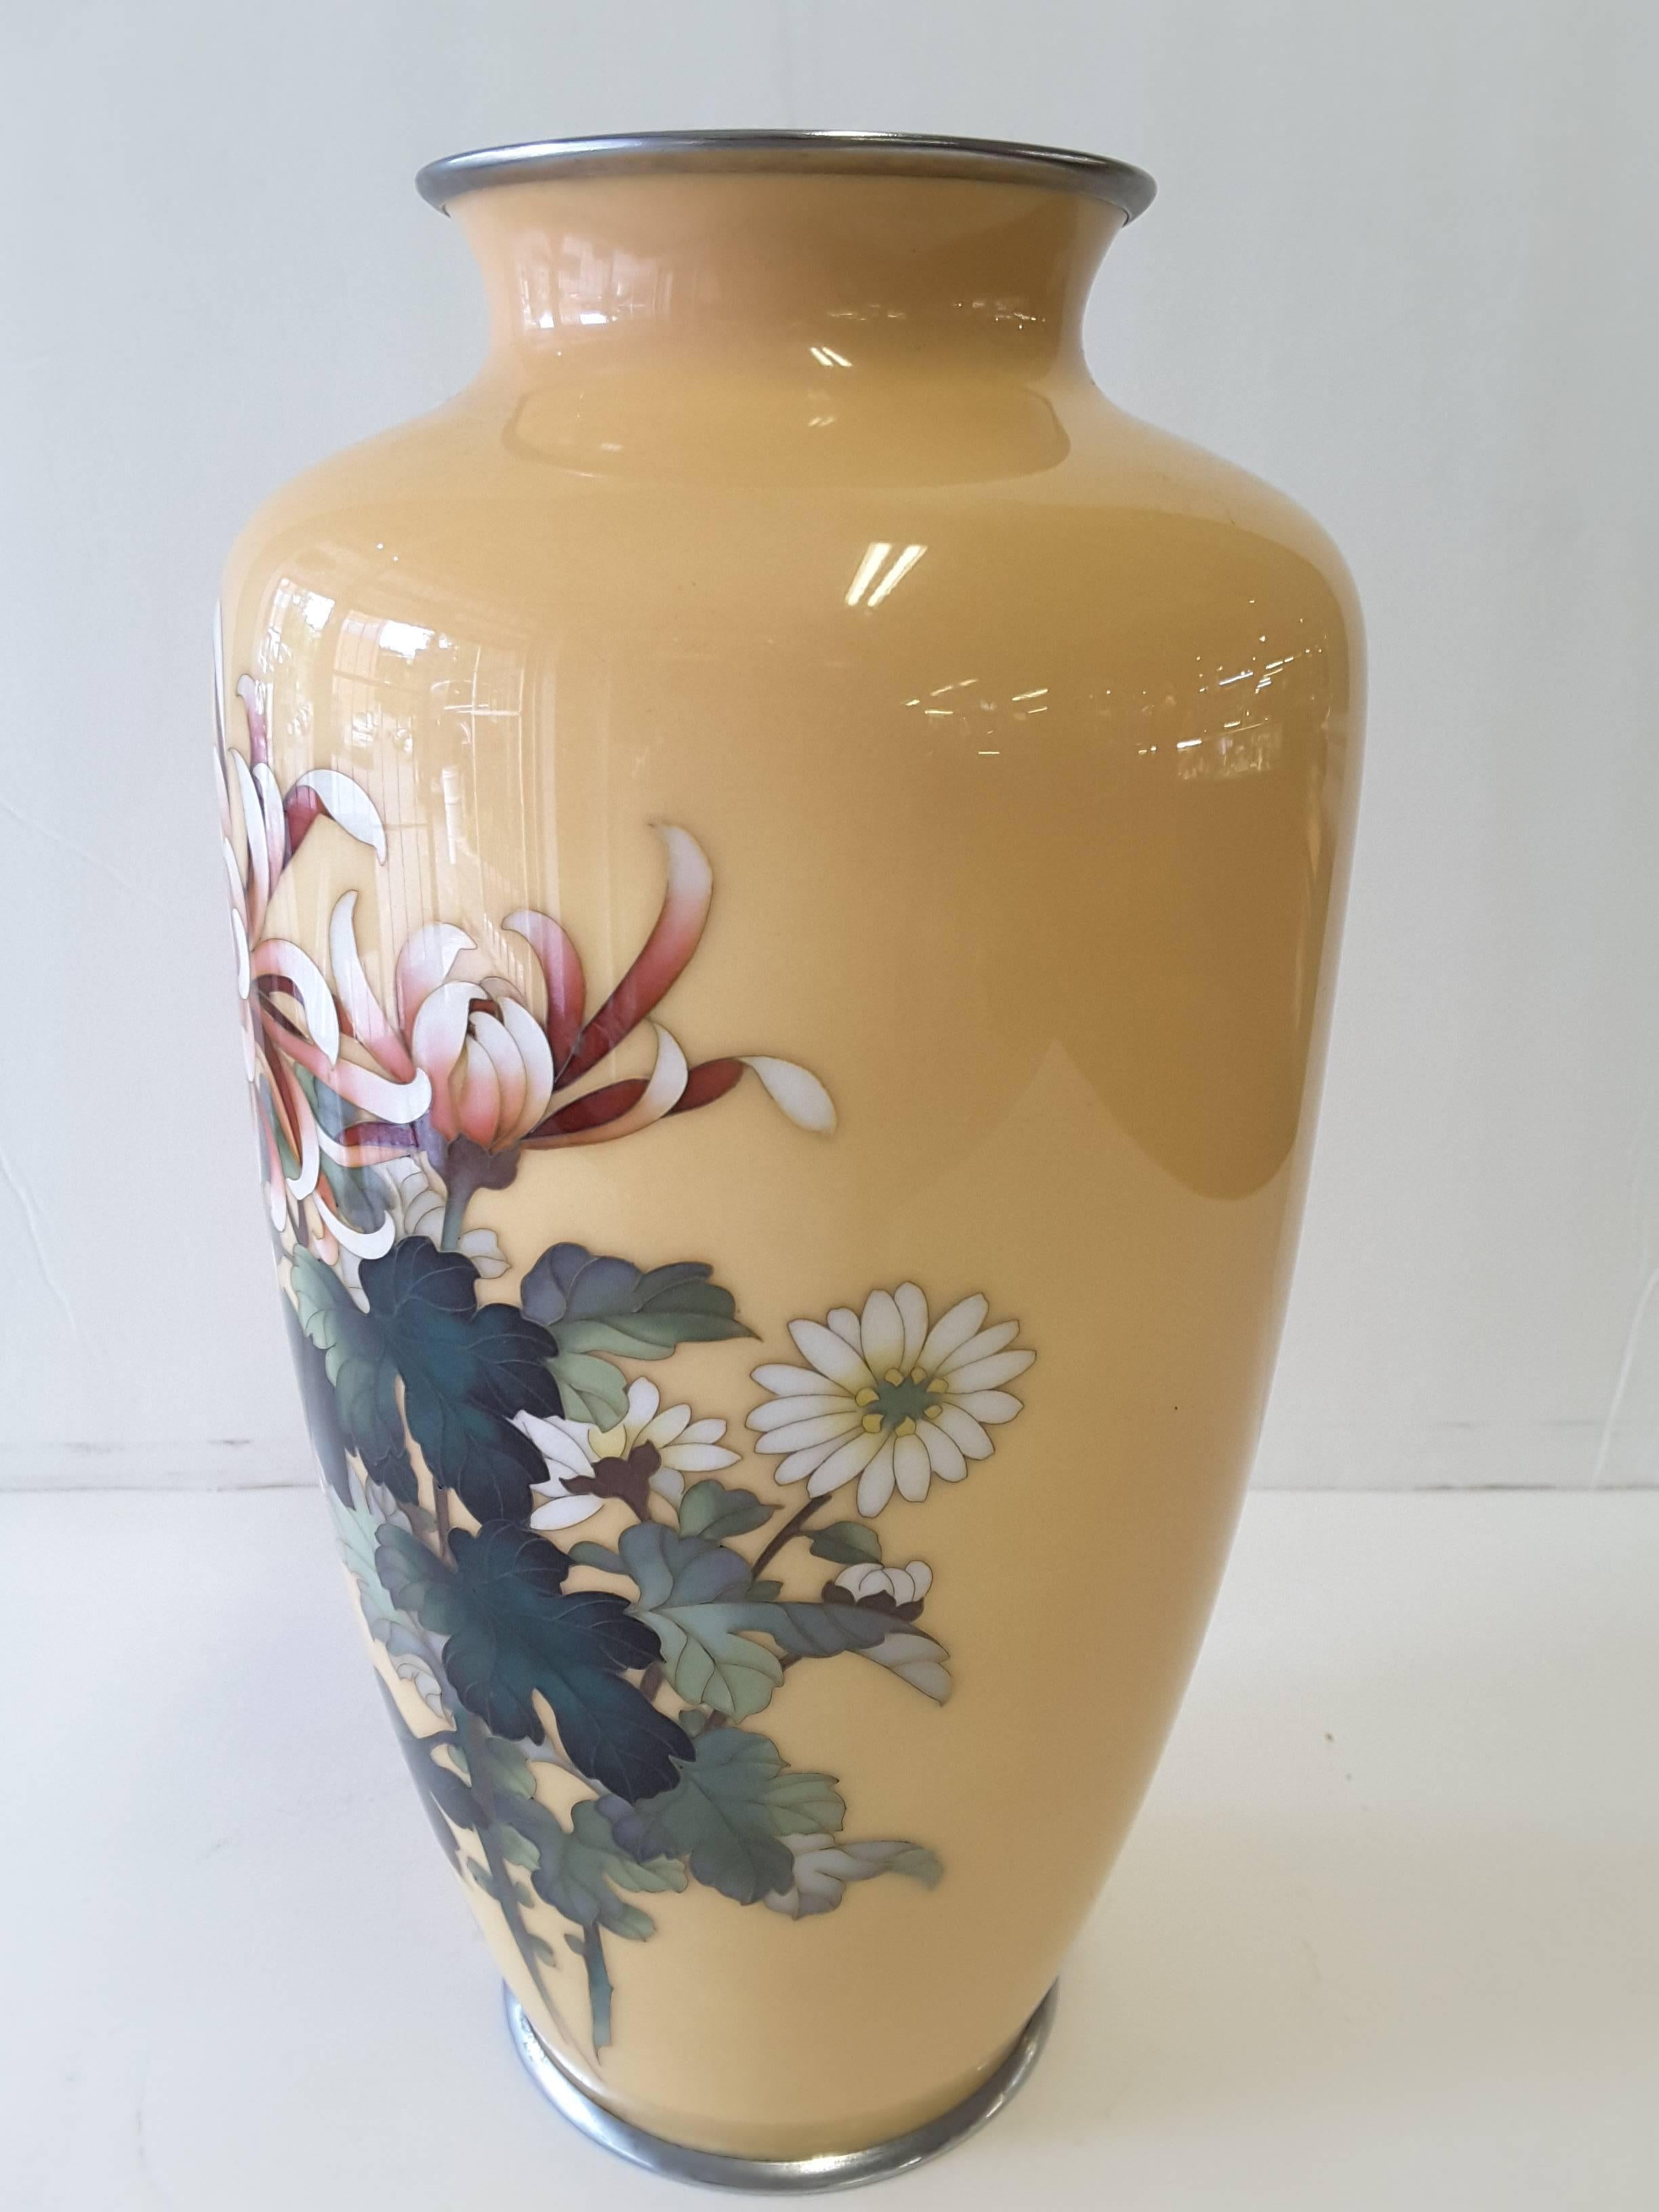 A Japanese cloisonne enamel vase by Ando Jubei (1876-1953), Meiji period vase. An early 20th century enamel worked in silver wire decorated with stalks of flowering spider chrysanthemums on a peach colored background. The top and base each have a